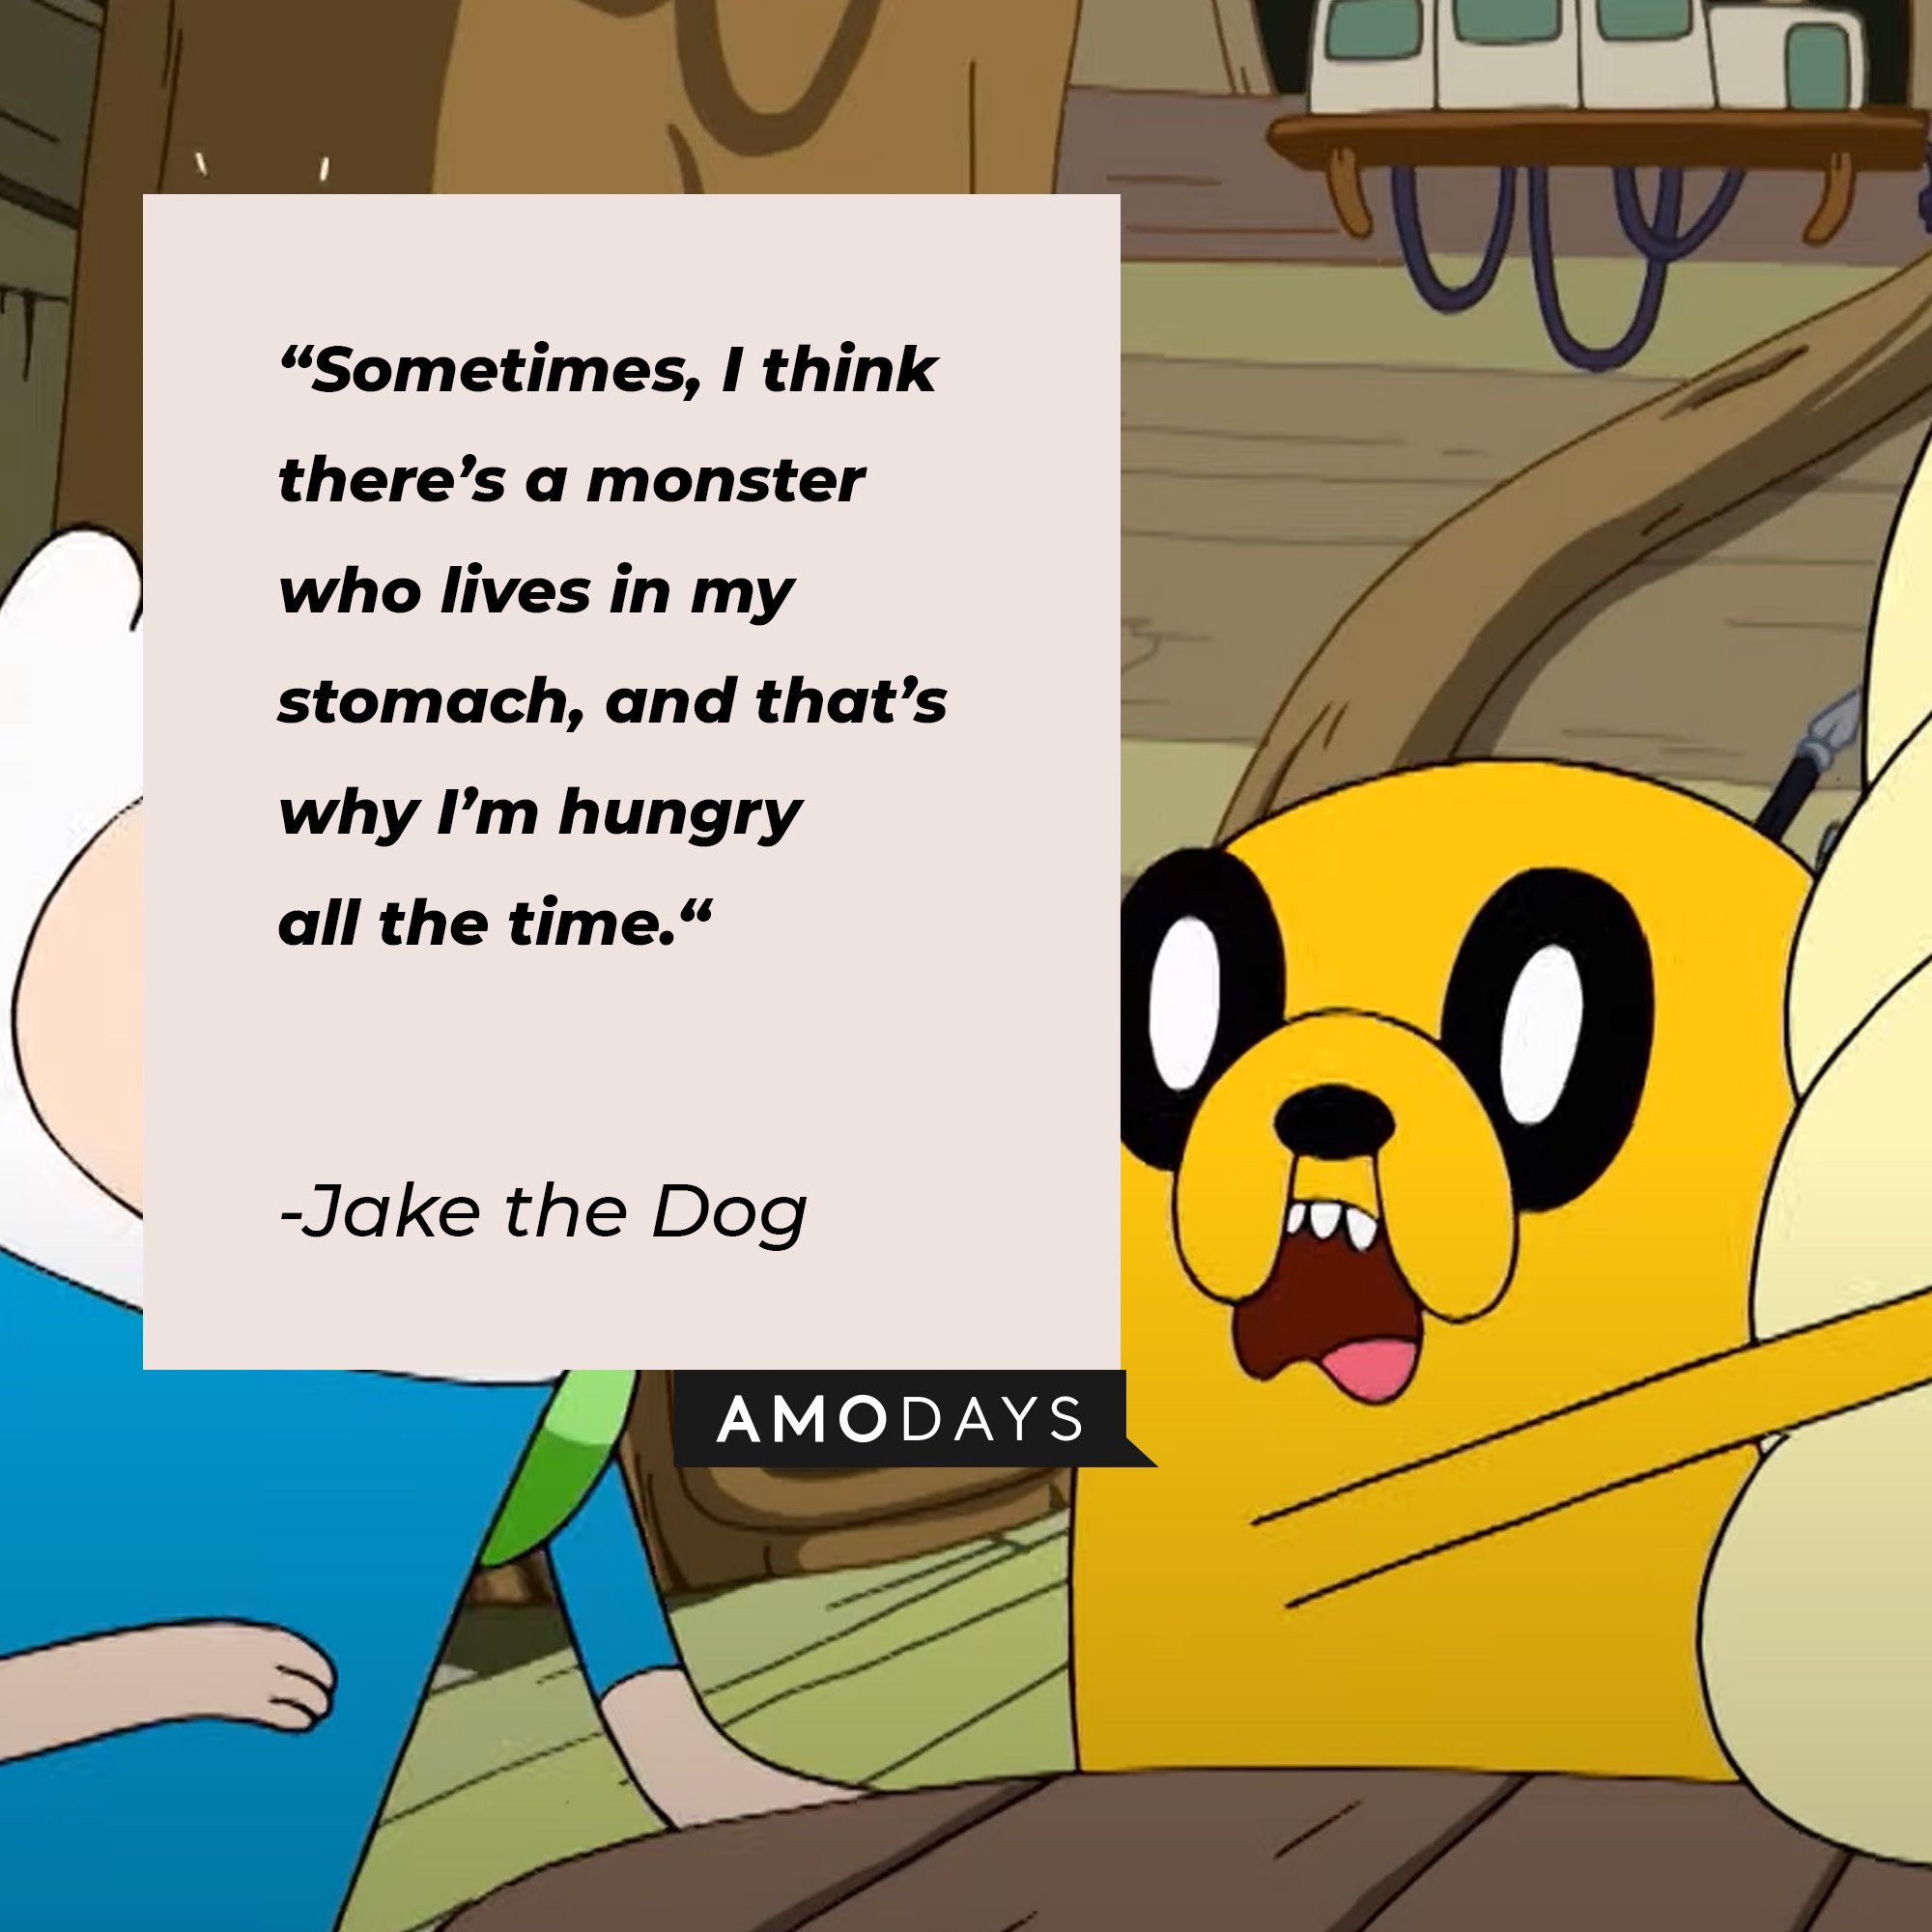   Jake the Dog’s quote: “Sometimes, I think there’s a monster who lives in my stomach, and that’s why I’m hungry all the time.“ |  Image: AmoDays